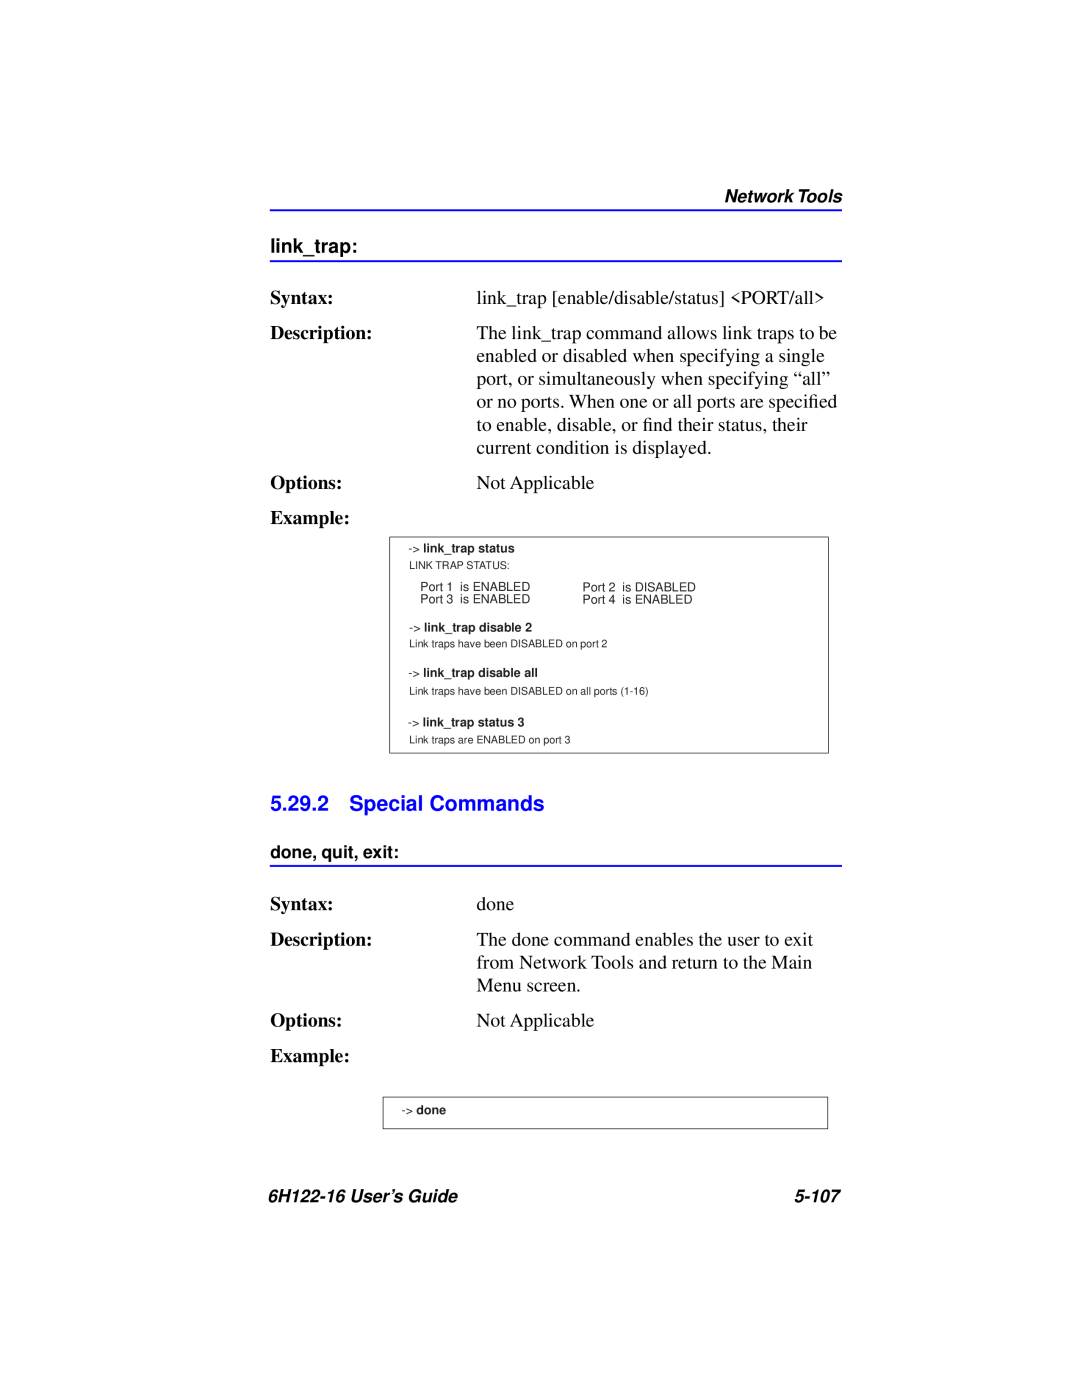 Cabletron Systems 6H122-16 manual Special Commands, linktrap, Syntax, Description, Options, Example 